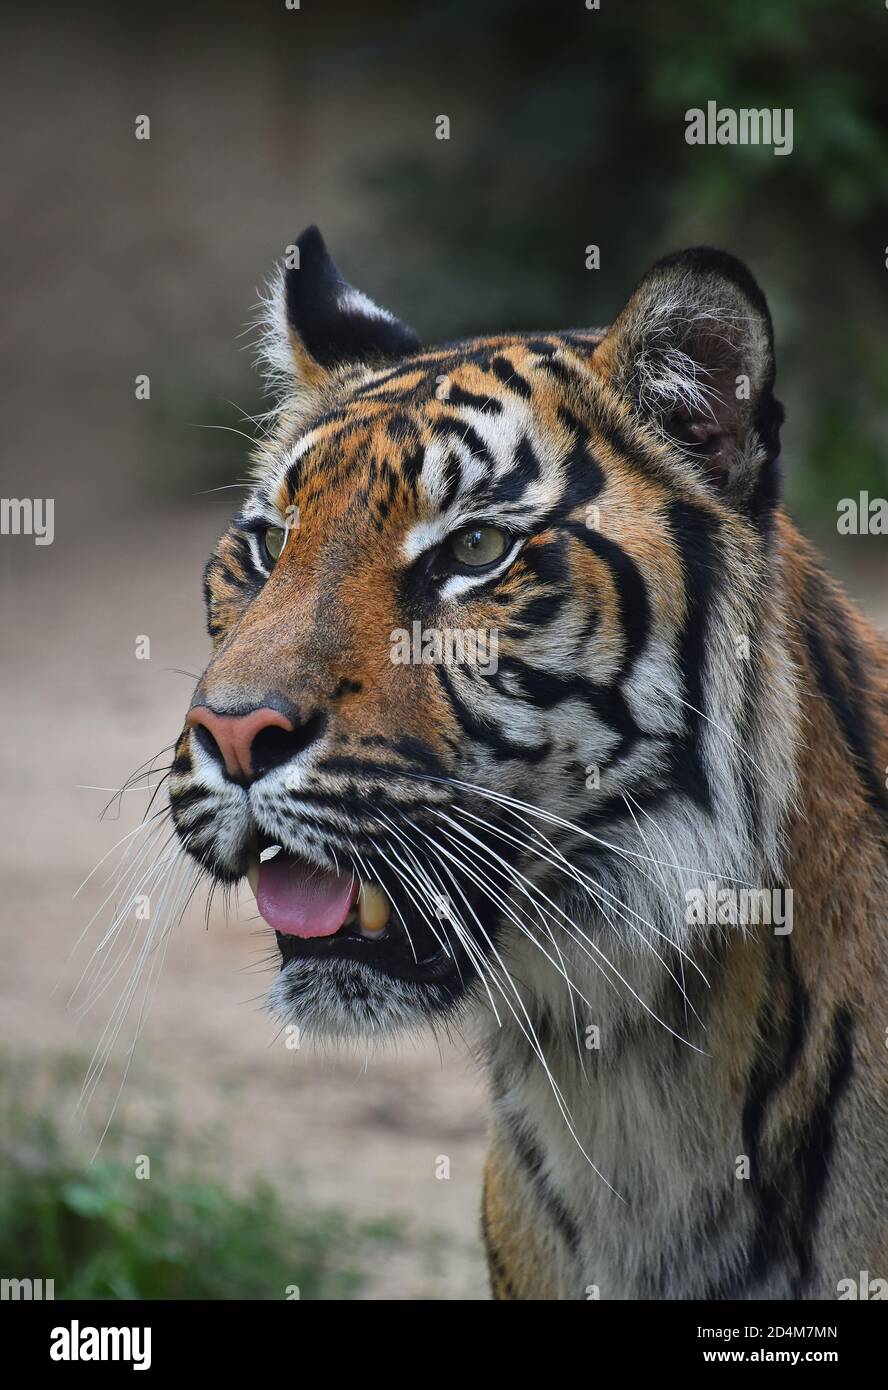 Close up portrait of one young Sumatran tiger (Panthera tigris sondaica) looking at camera alerted with mouth open, high angle view Stock Photo